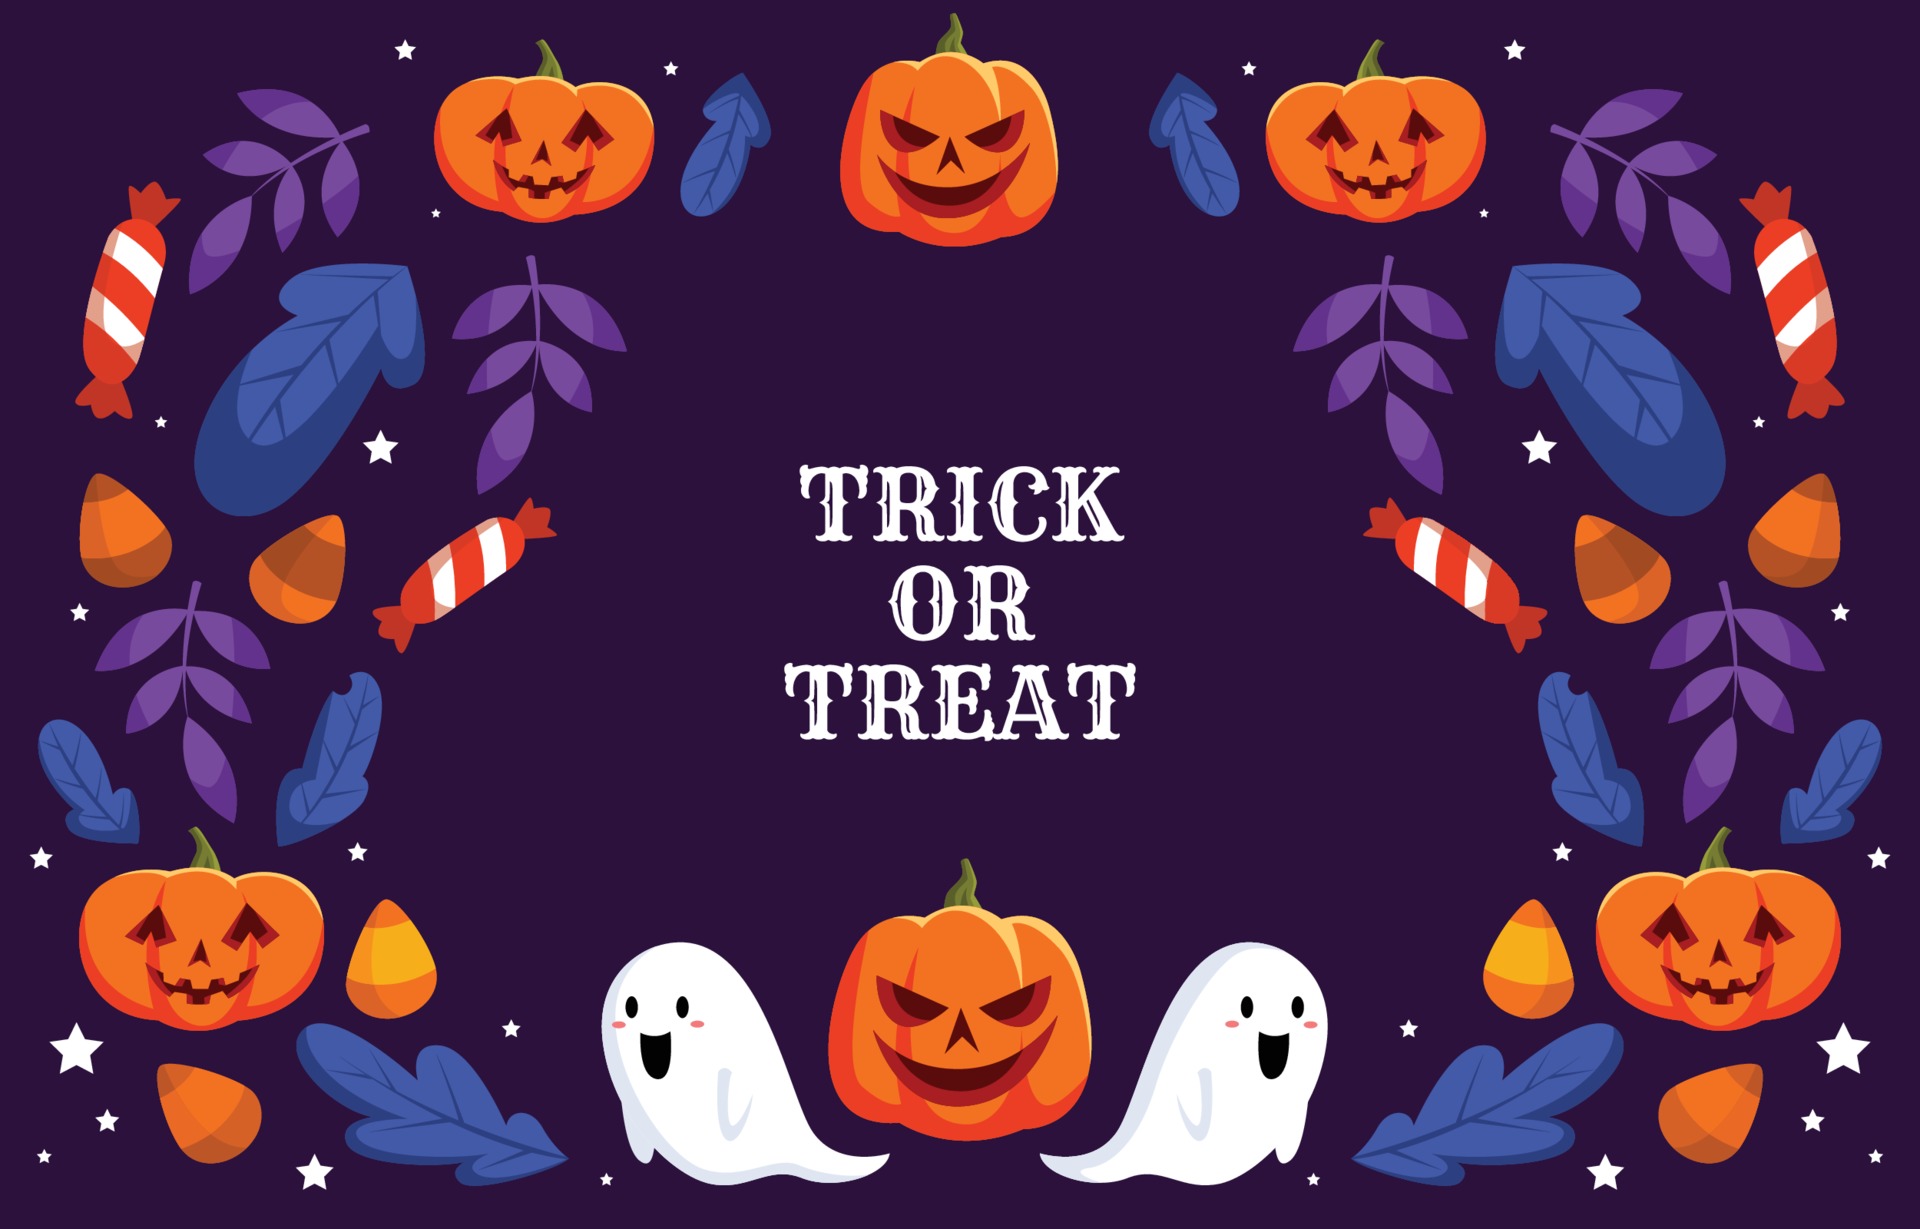 Trick or Treat 20 HD wallpapers for your Halloween spirit